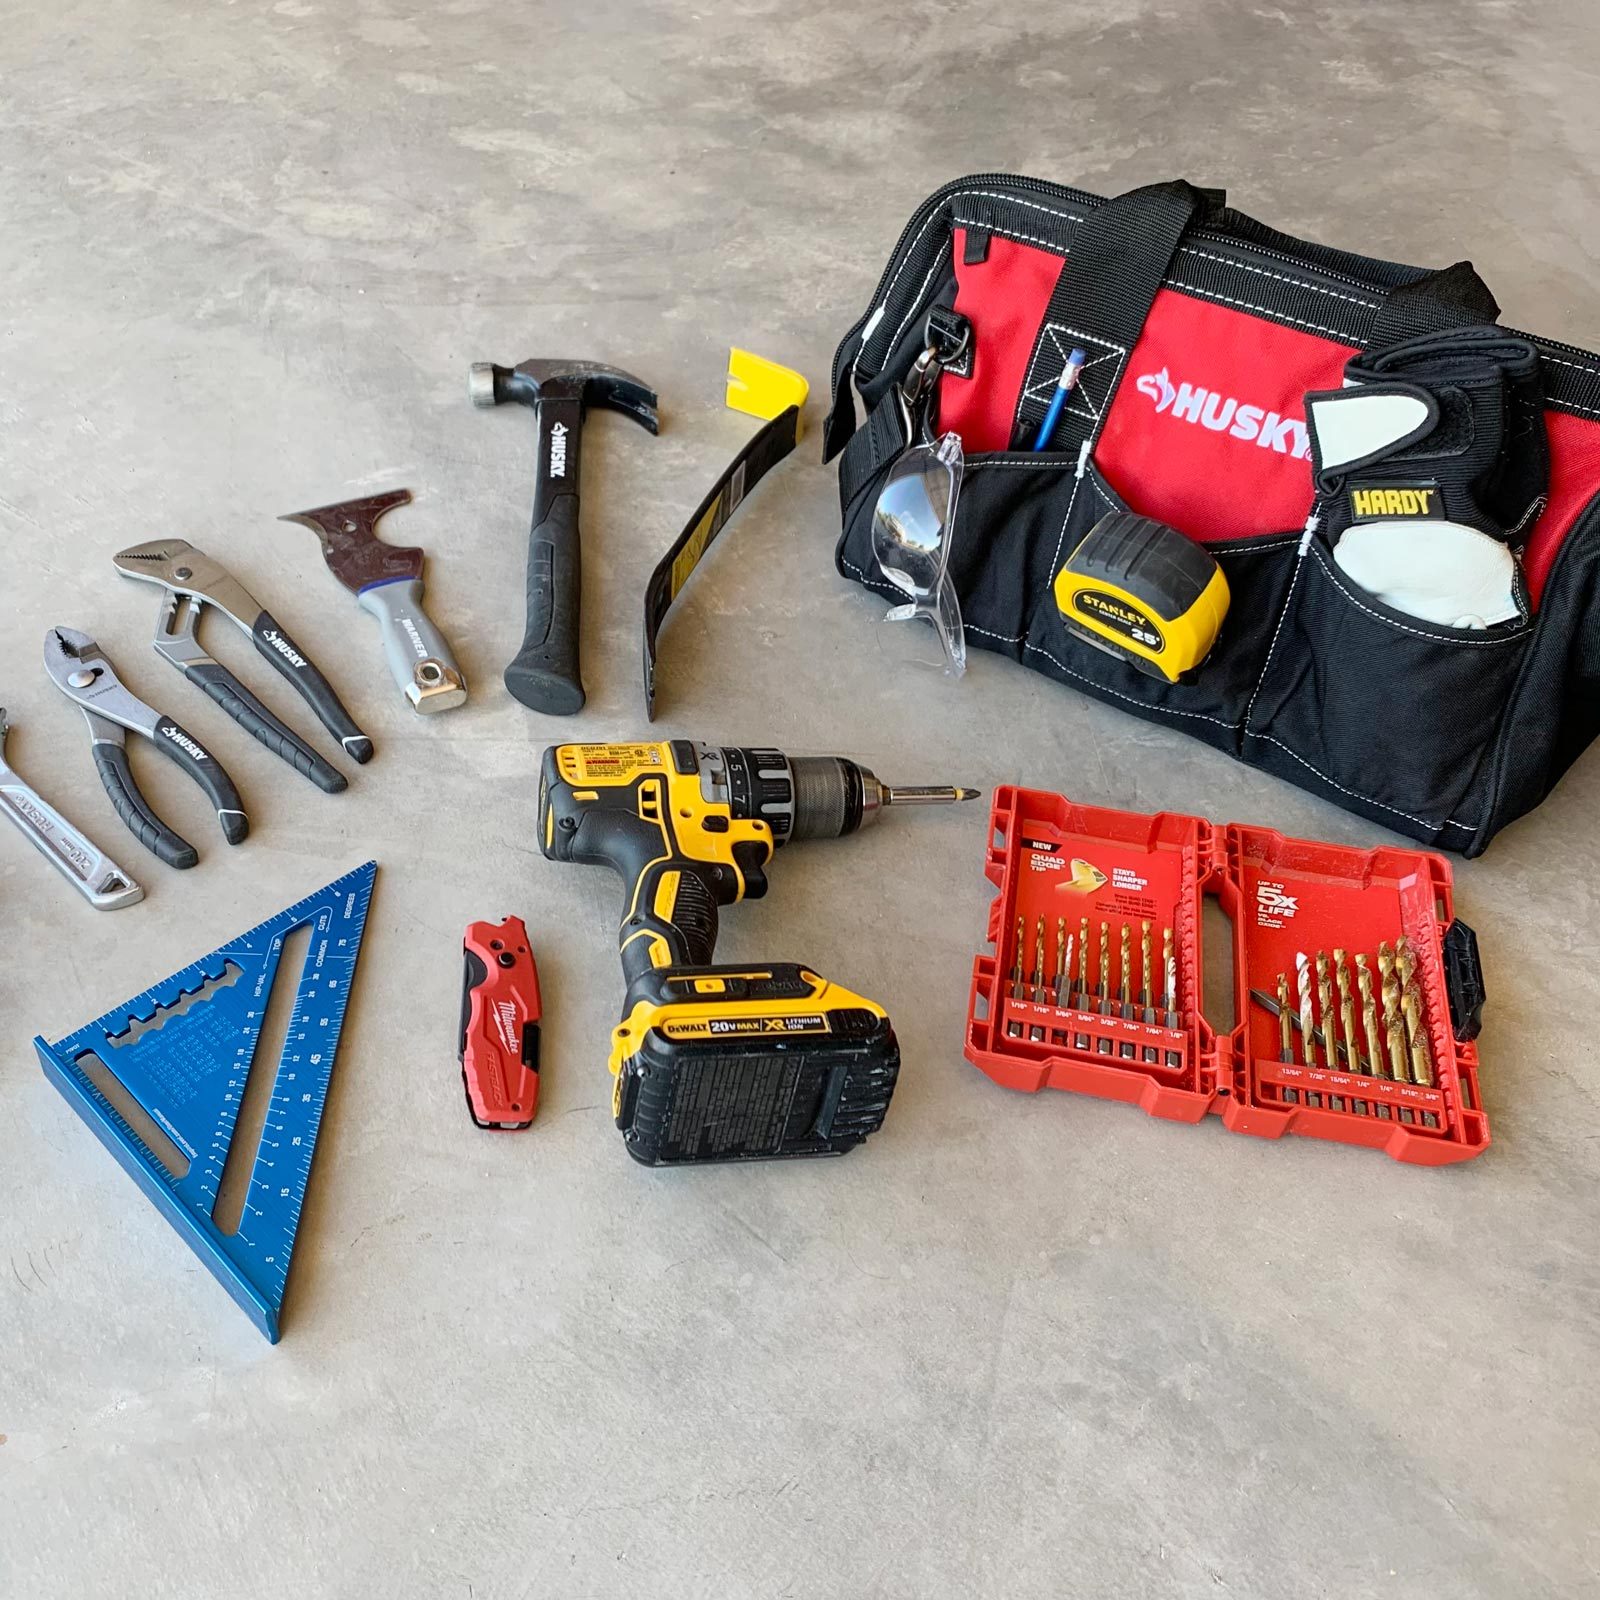 tool bag and tools spread out on a concrete floor